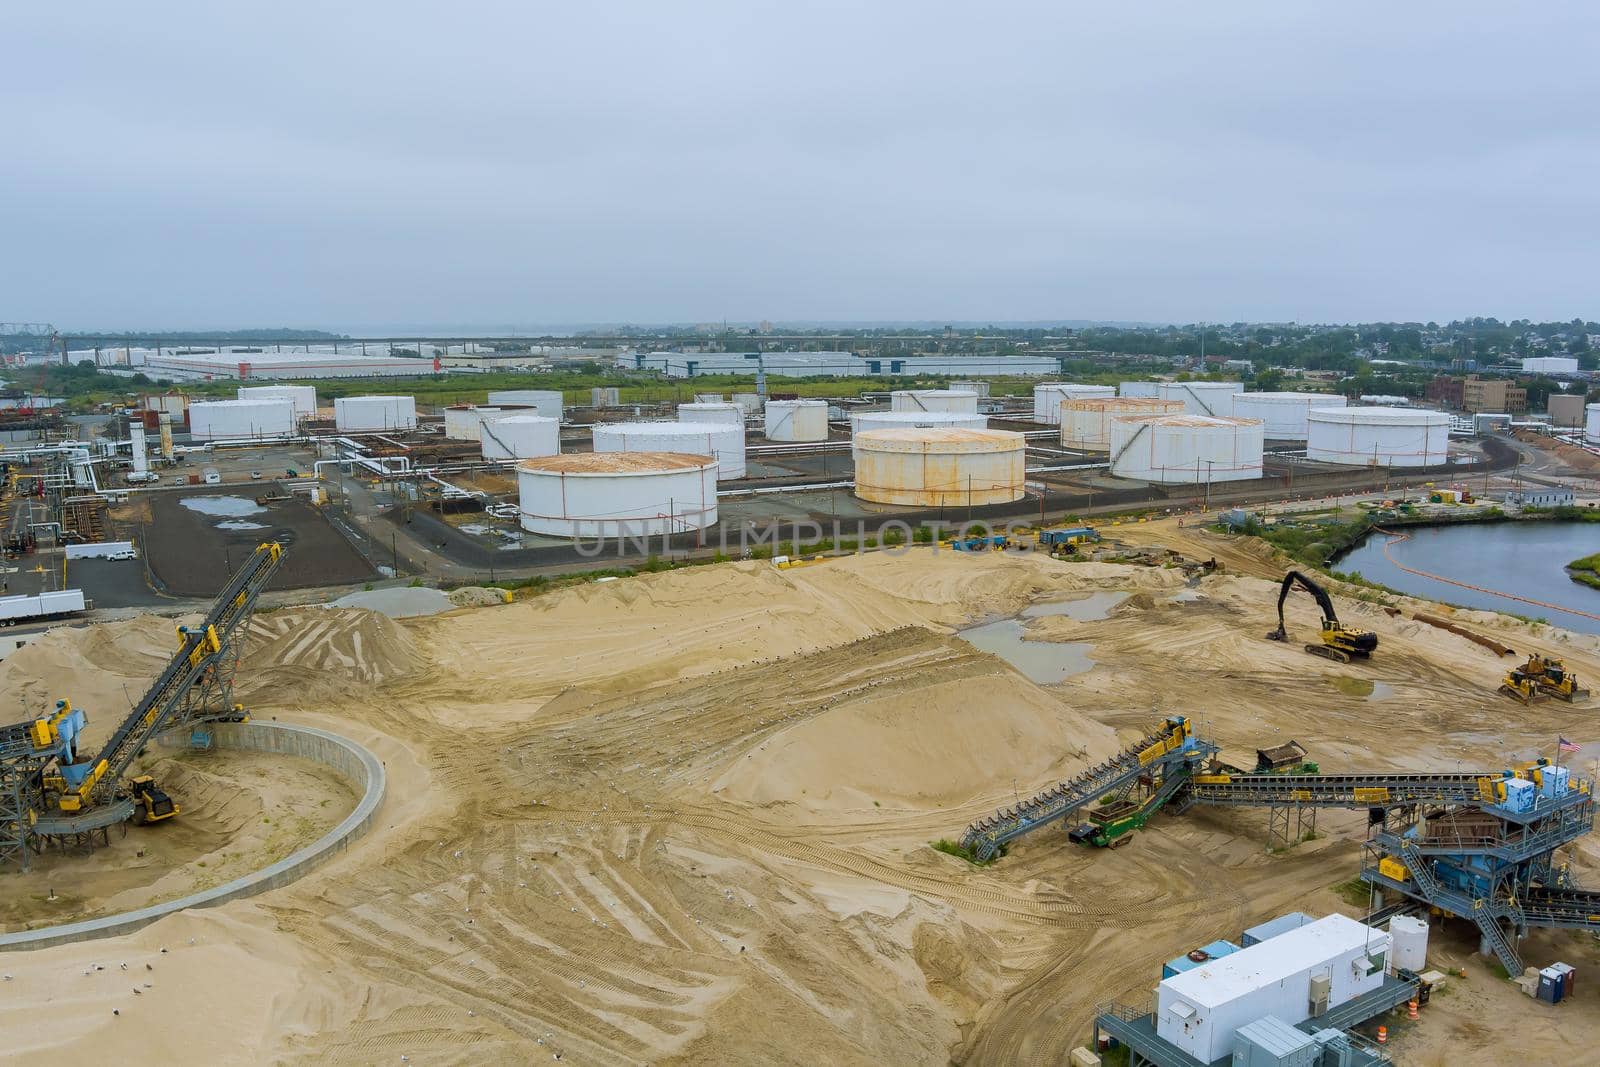 Construction of a new terminal large oil storage tank industry oil refinery by ungvar